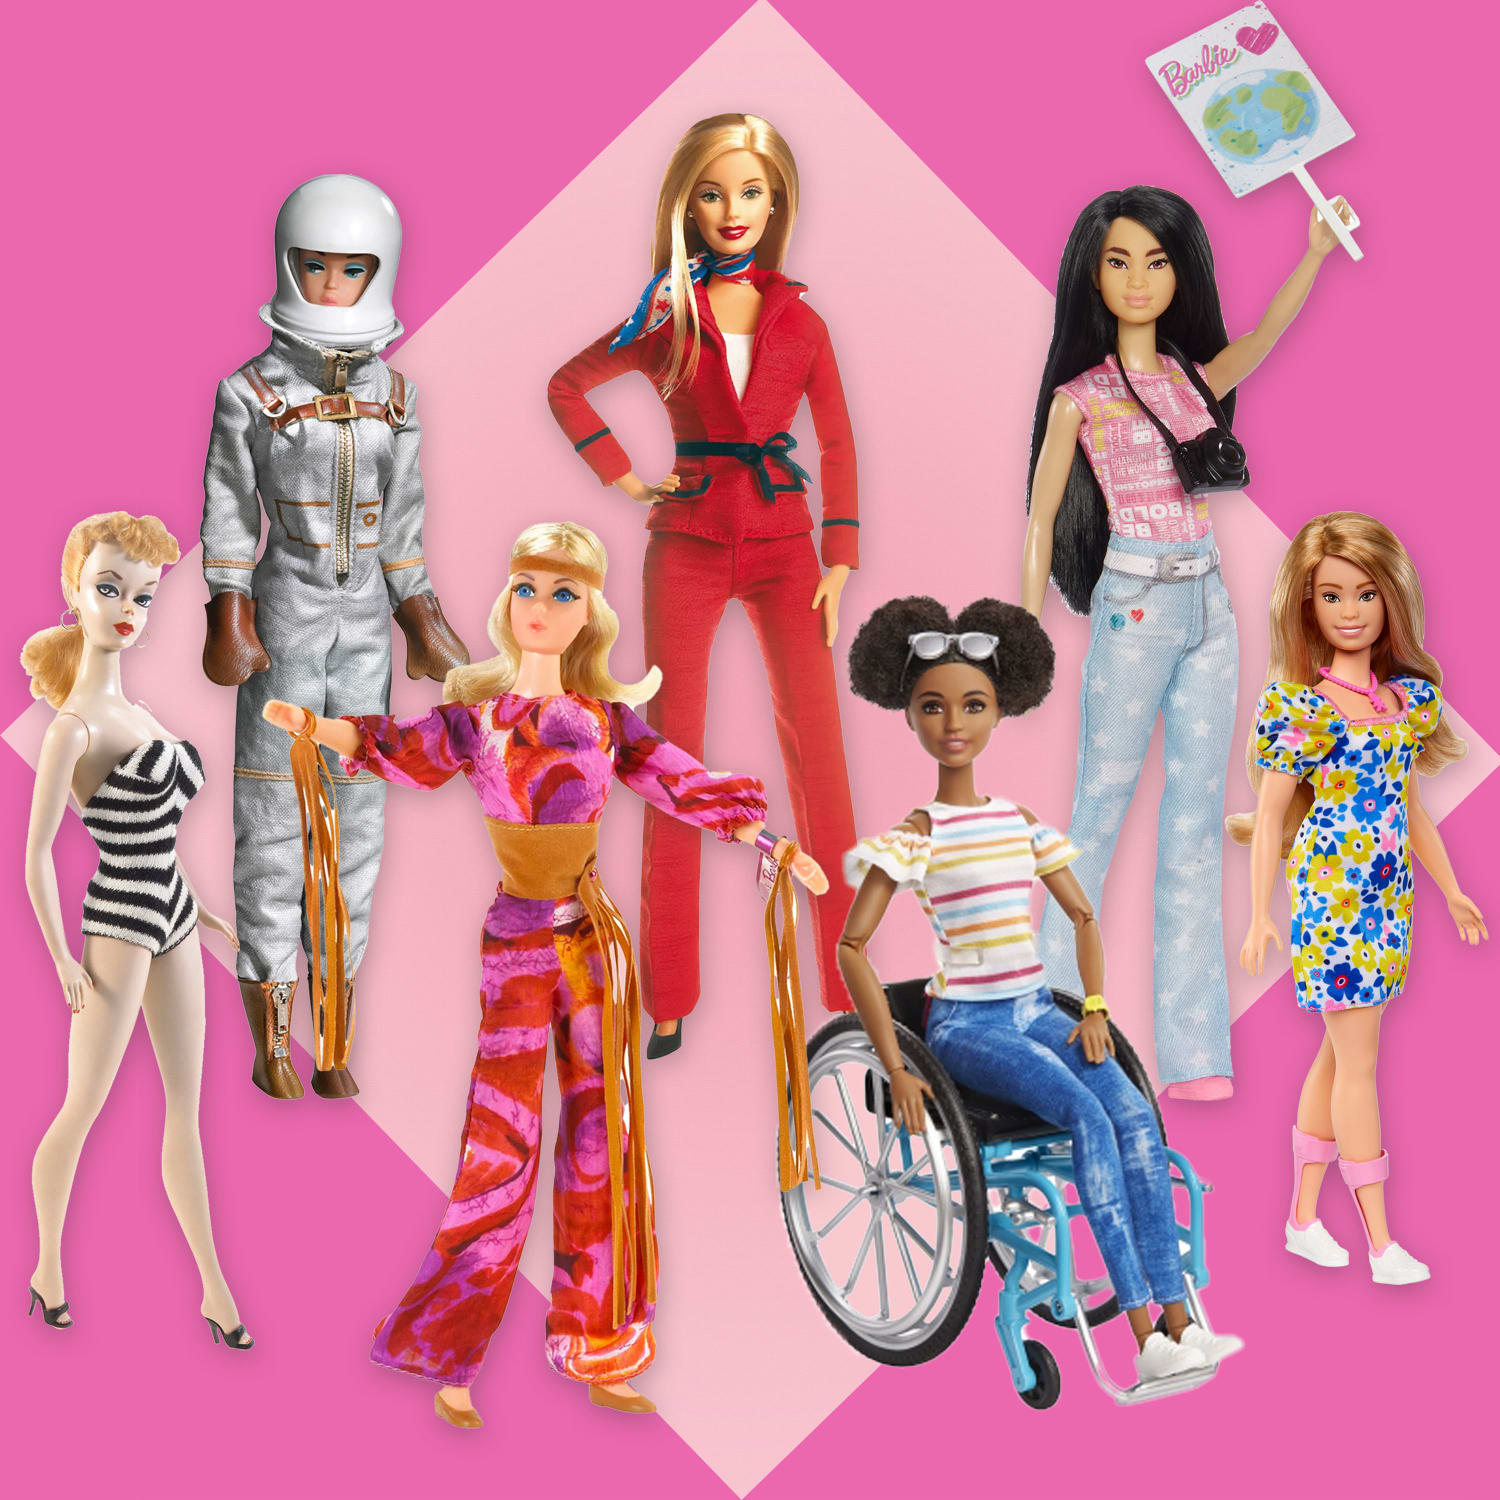 Types of Barbies Throughout the Years